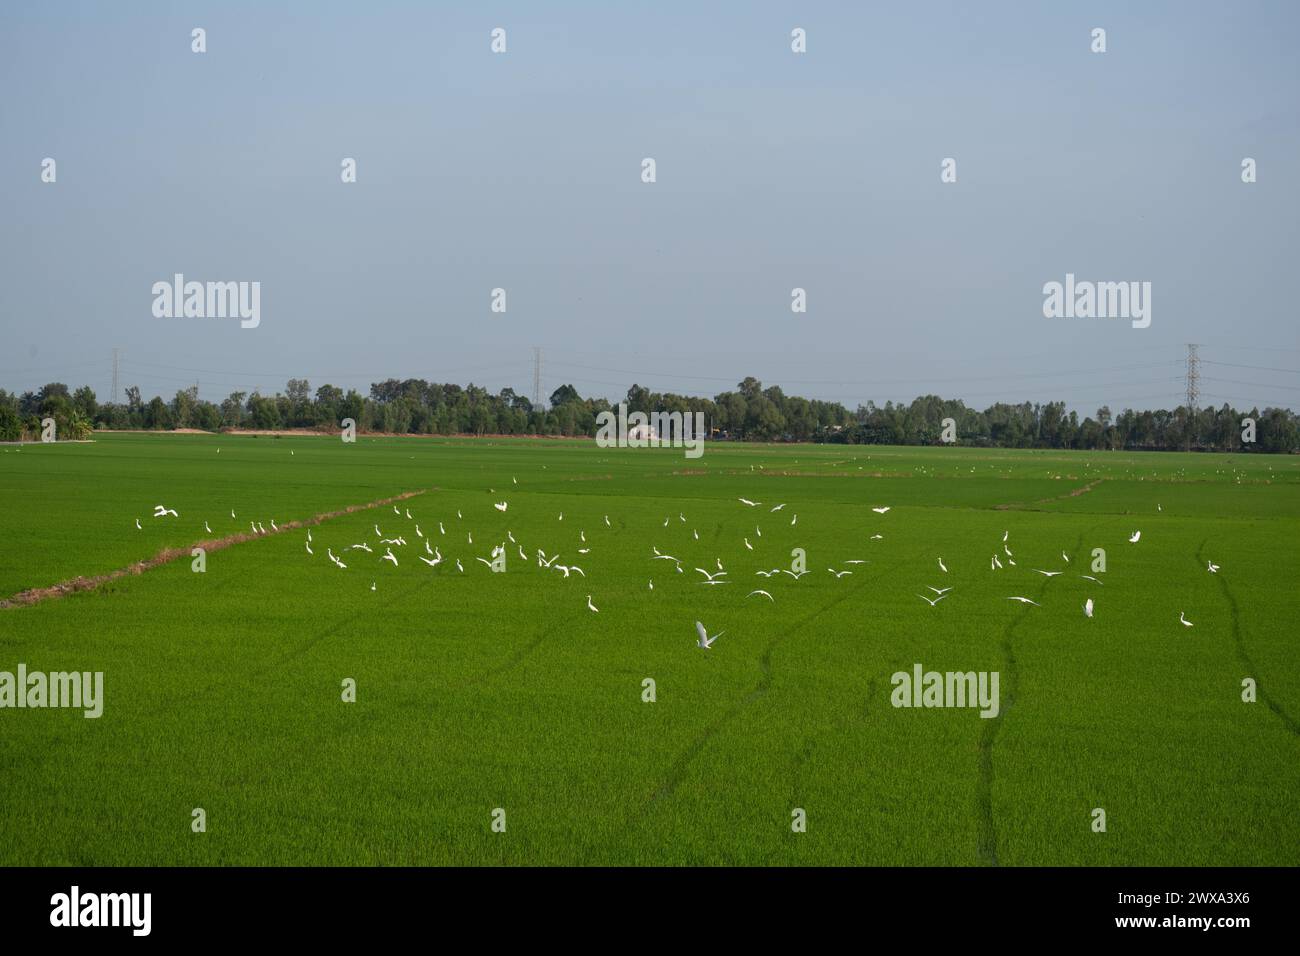 Typical Vietnamese Rice Fields with White Birds Flying Stock Photo